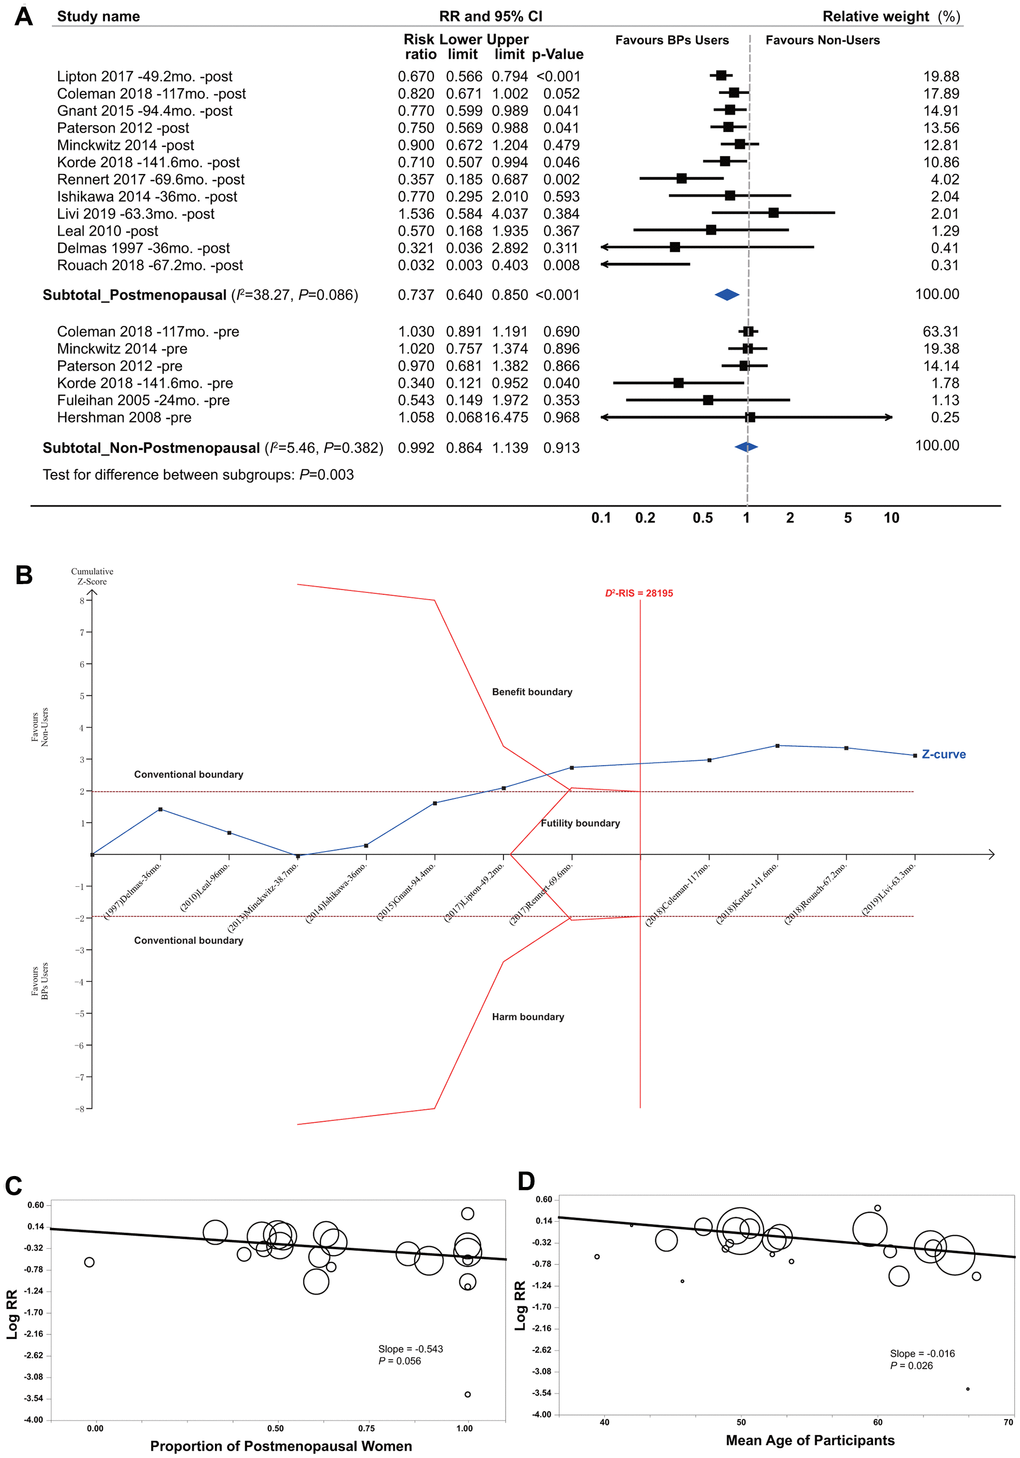 Summarized results of bisphosphonates and breast cancer survival by menopause status. (A) Conventional subgroup meta-analysis by menopause status; (B) Trial sequential analysis of the postmenopausal subgroup; (C) Meta-regression analysis based on the proportion of postmenopausal women and (D) the mean age of participants in individual studies. In the panels of (C, D) circles indicate individual studies, and the size of the circle is proportional to the relative weight that the study has in calculating the summary effect estimate.